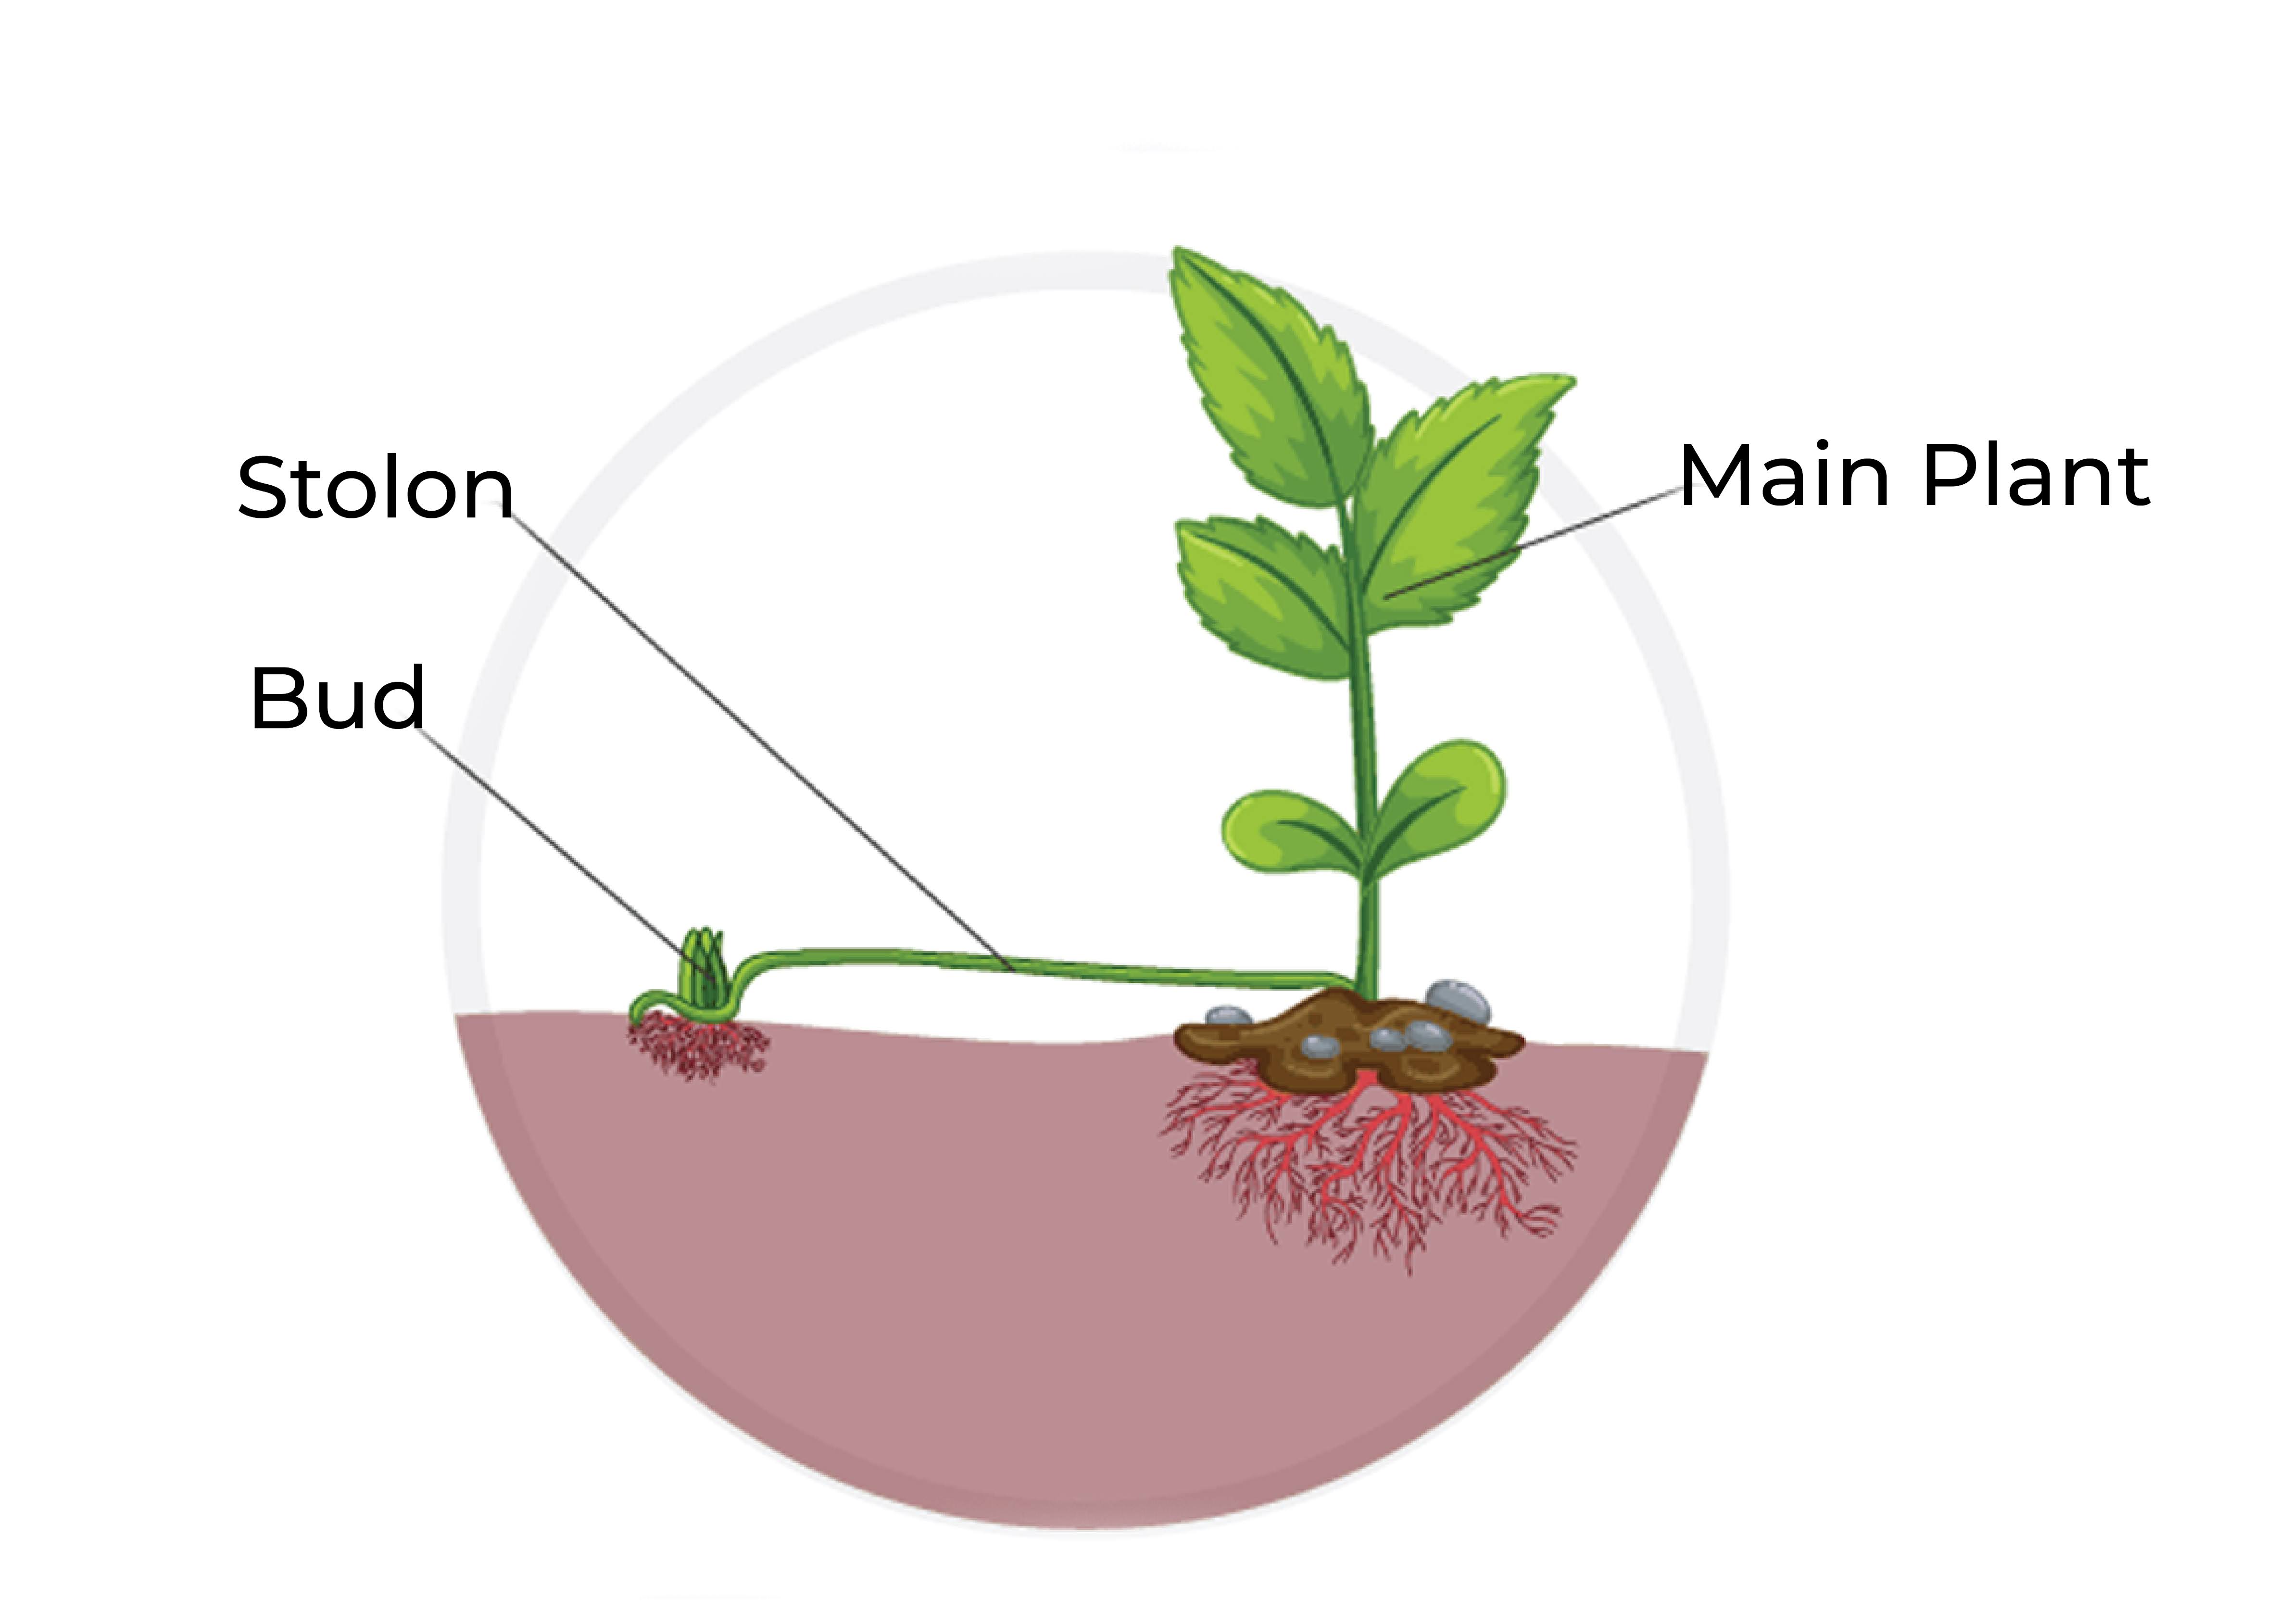 asexual reproduction in plants